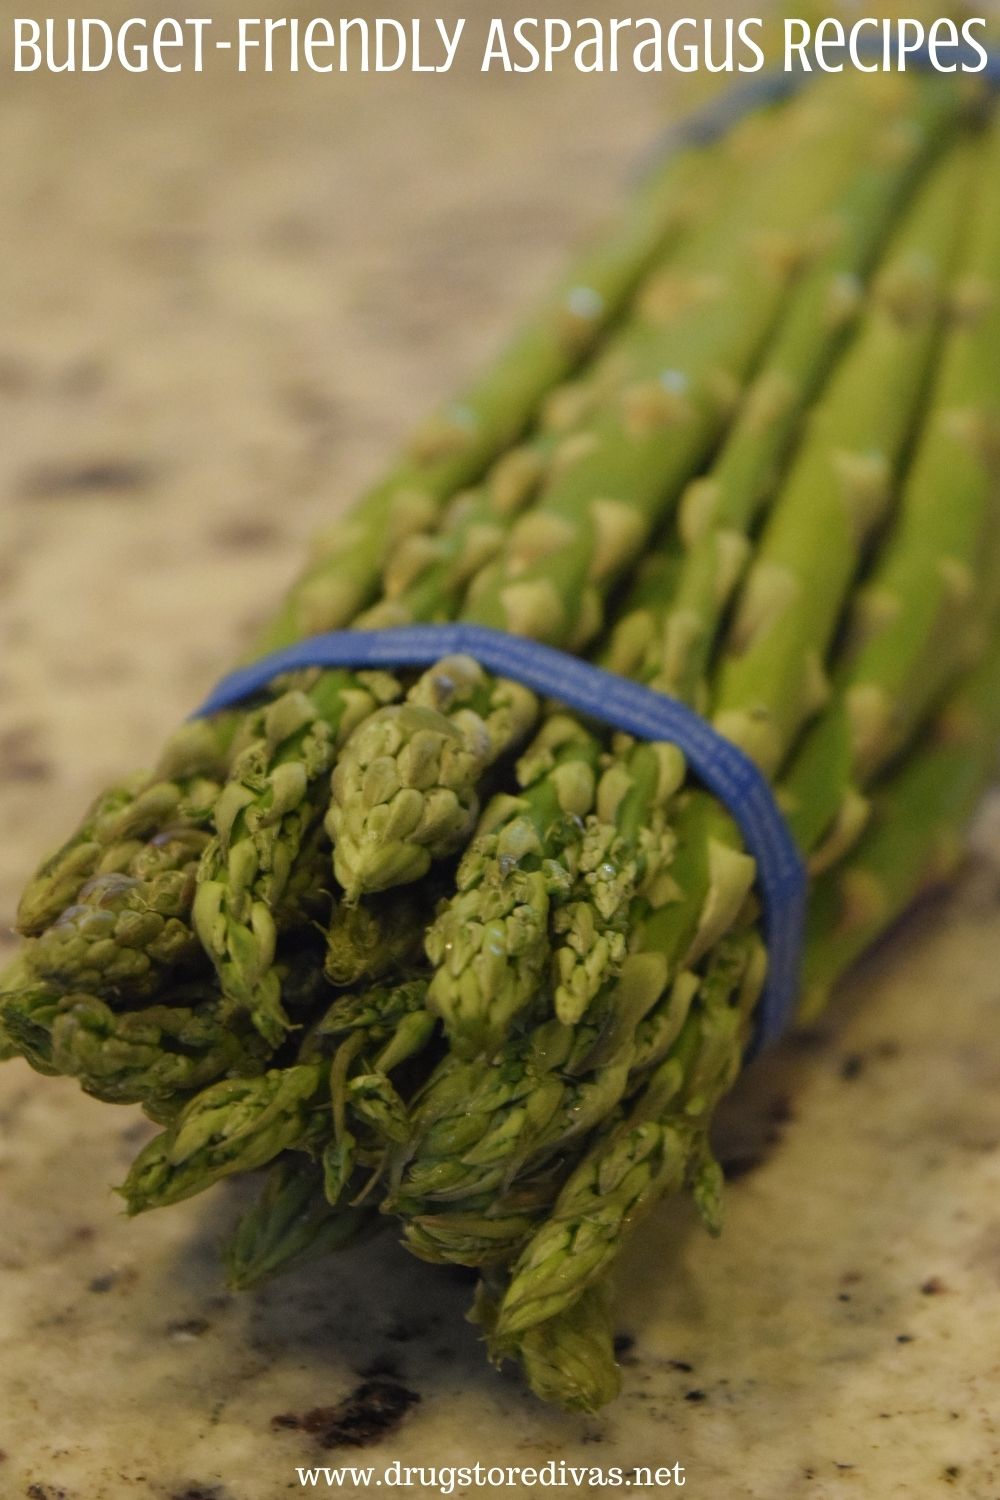 Bundle of asparagus with the words 